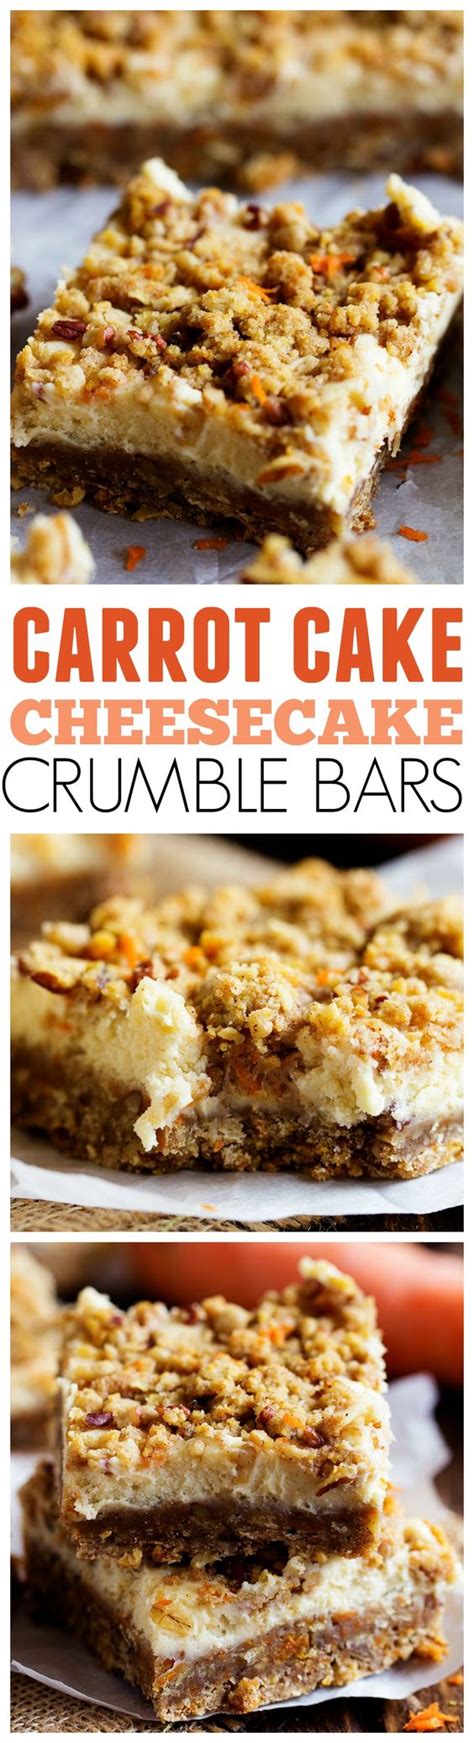 Carrot Cake Cheesecake Carrot Cakes And Best Desserts On